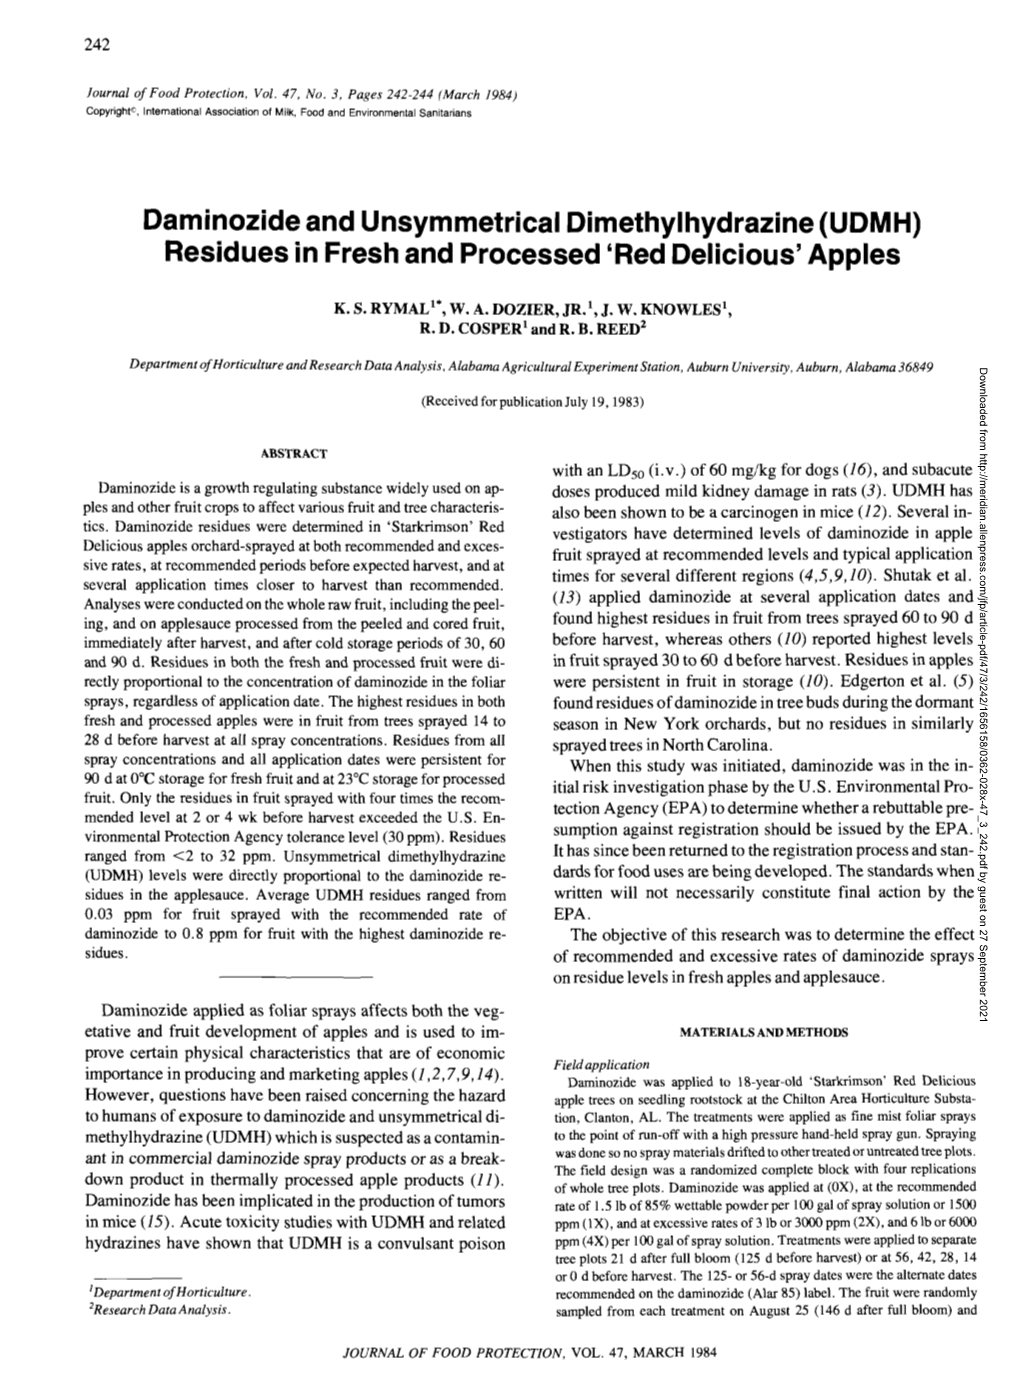 Daminozideand Unsymmetrical Dimethylhydrazine(UDMH) Residues in Fresh and Processed 'Red Delicious' Apples